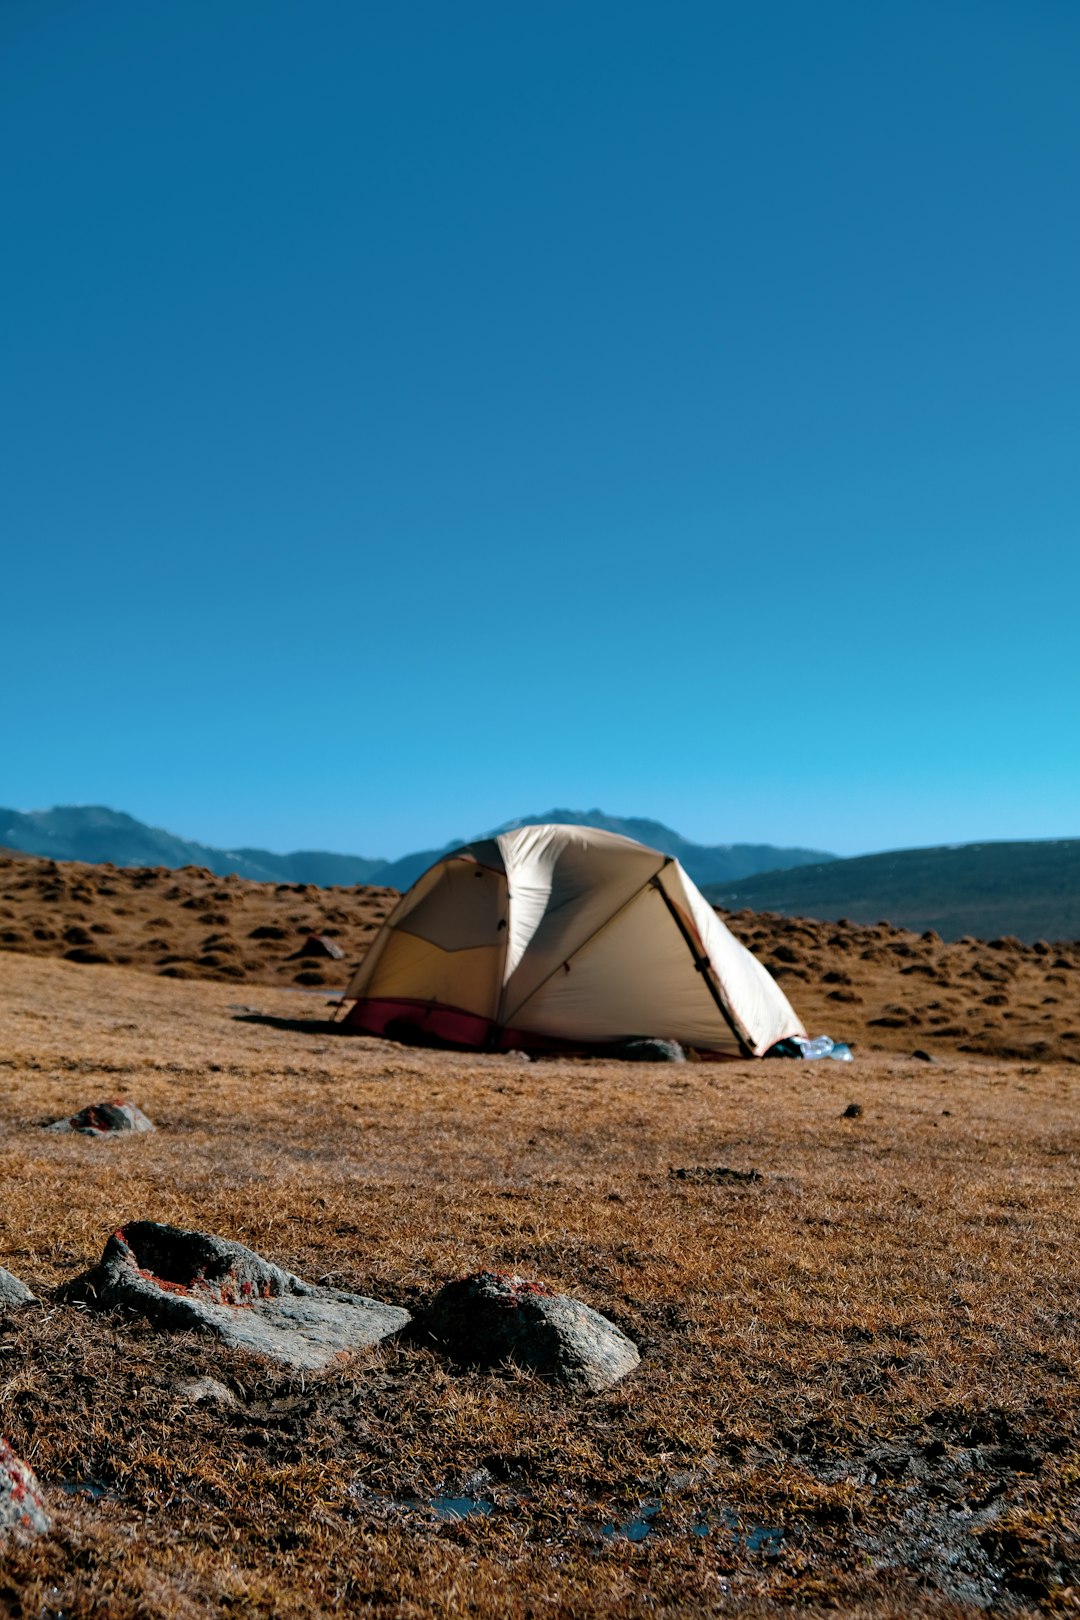 travelers stories about Camping in Xining, China